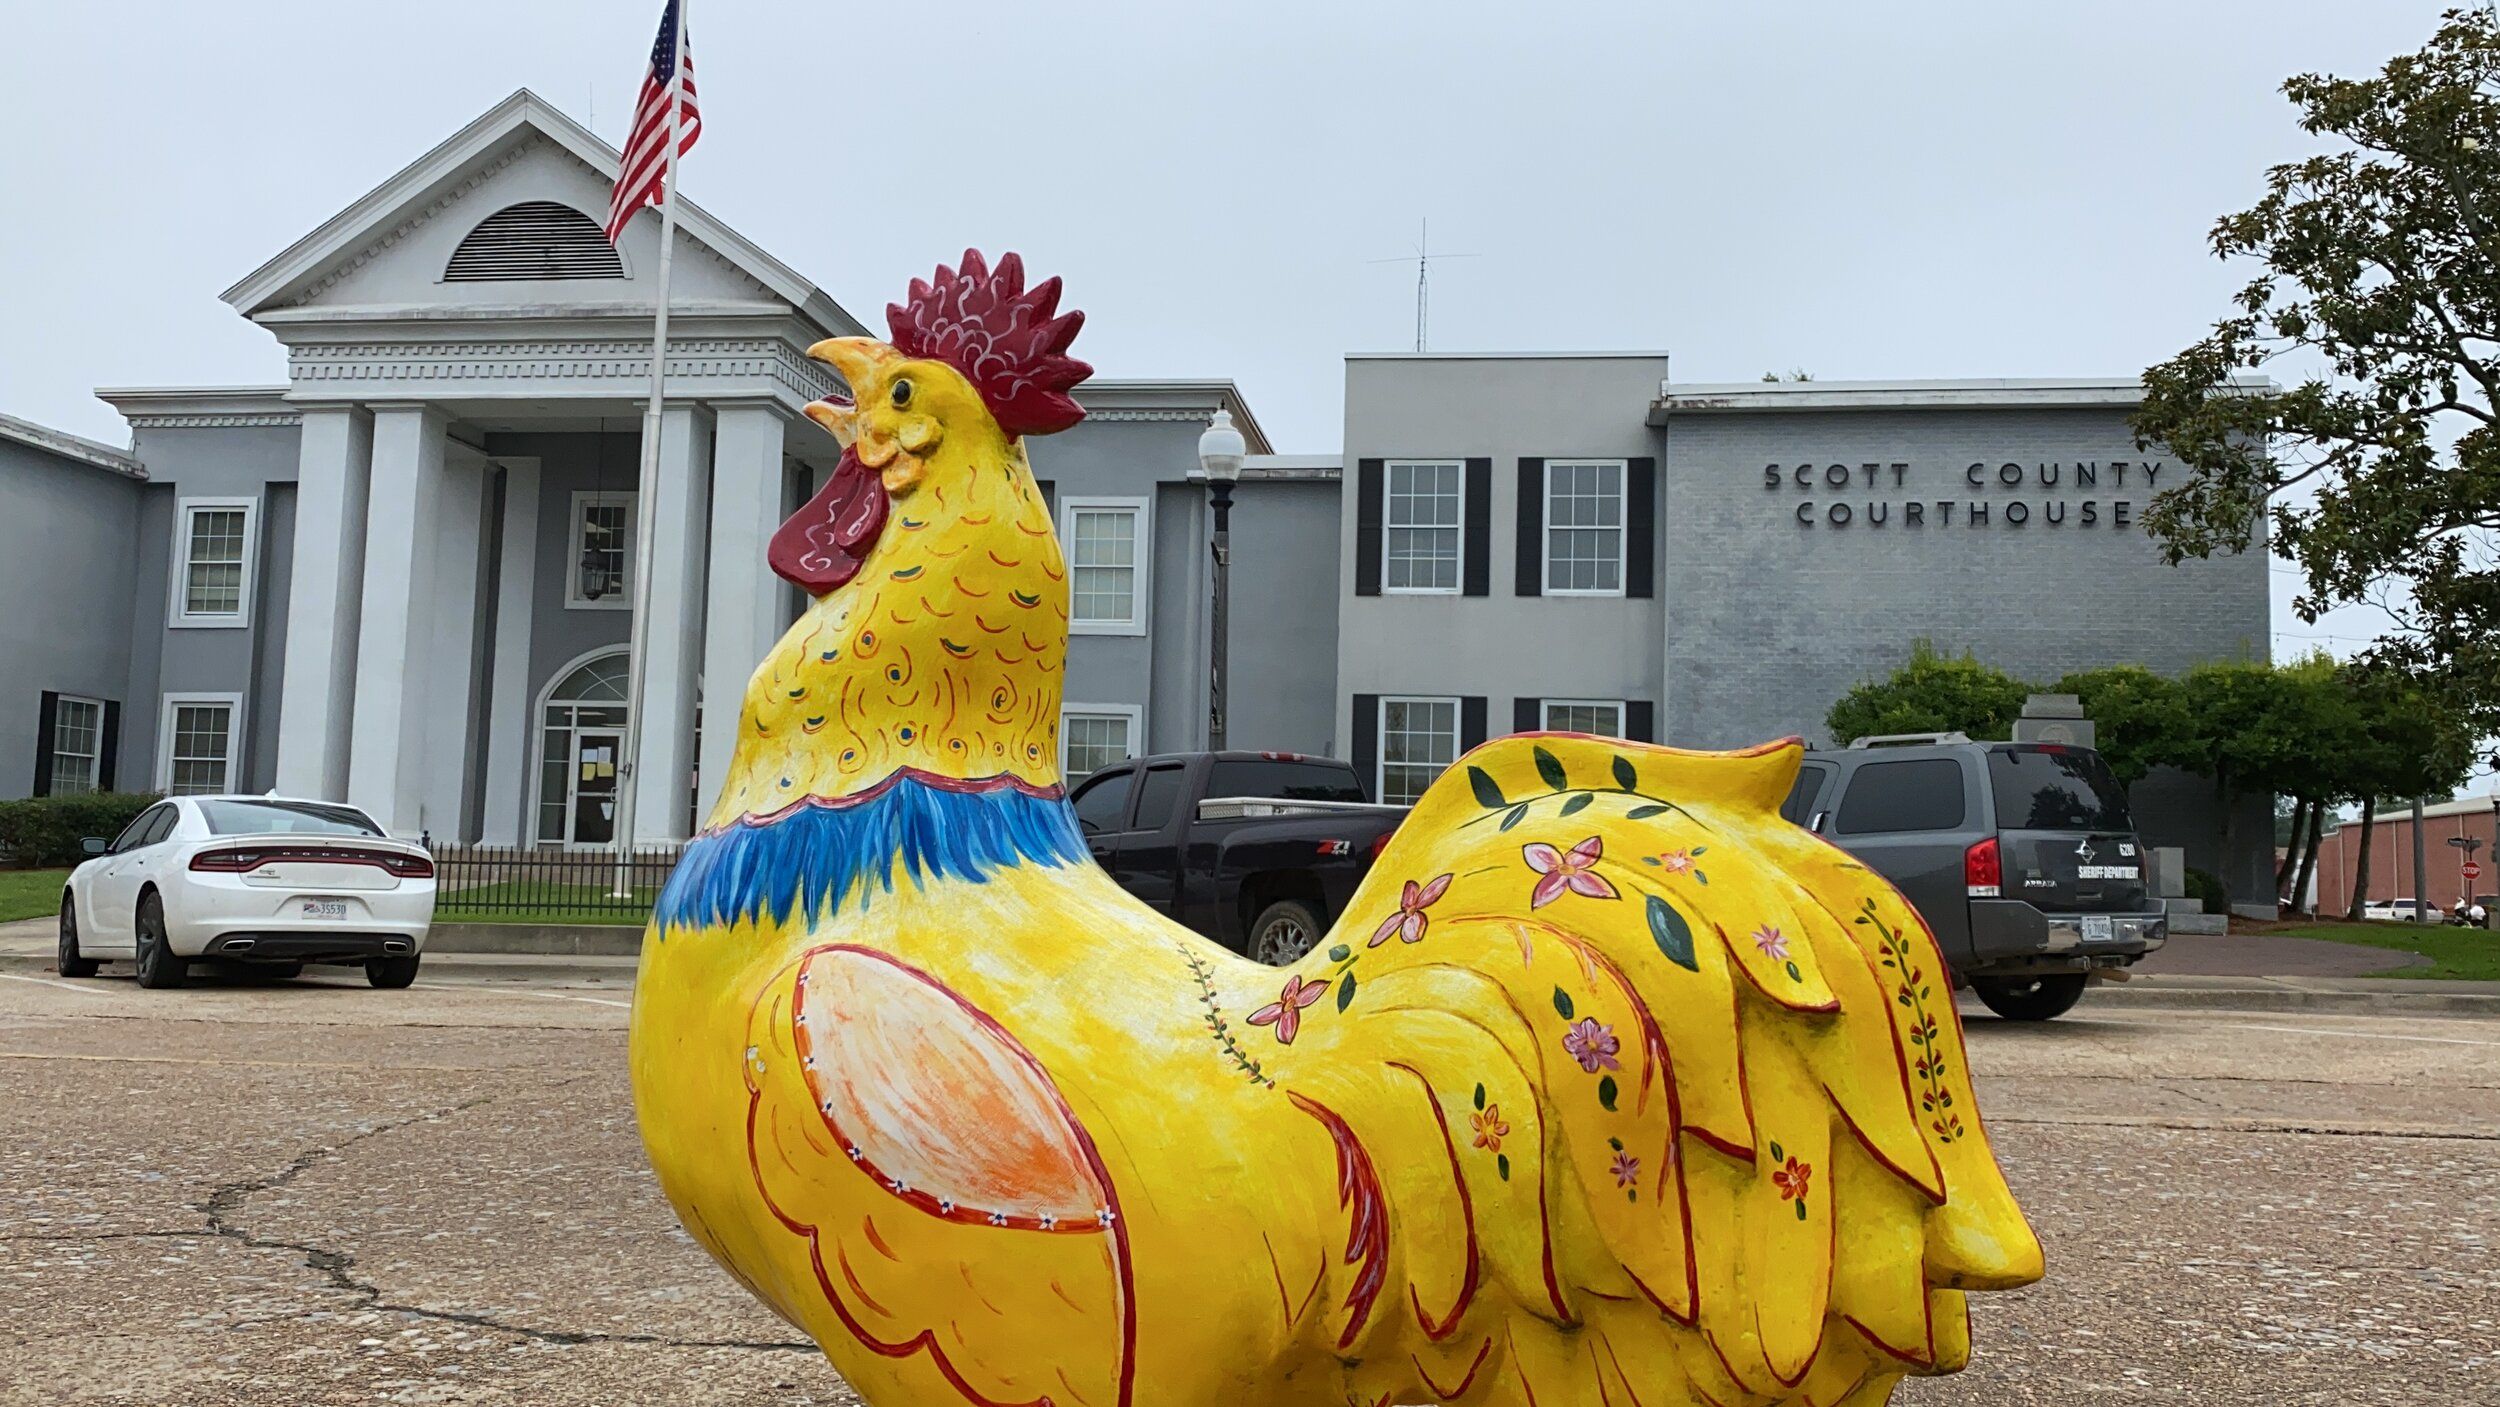 This chicken statue photographed against the backdrop of the Scott County Courthouse shows the area’s economic dependence on the poultry processing industry. Image by Sarah Warnock/MCIR. United States, 2020.